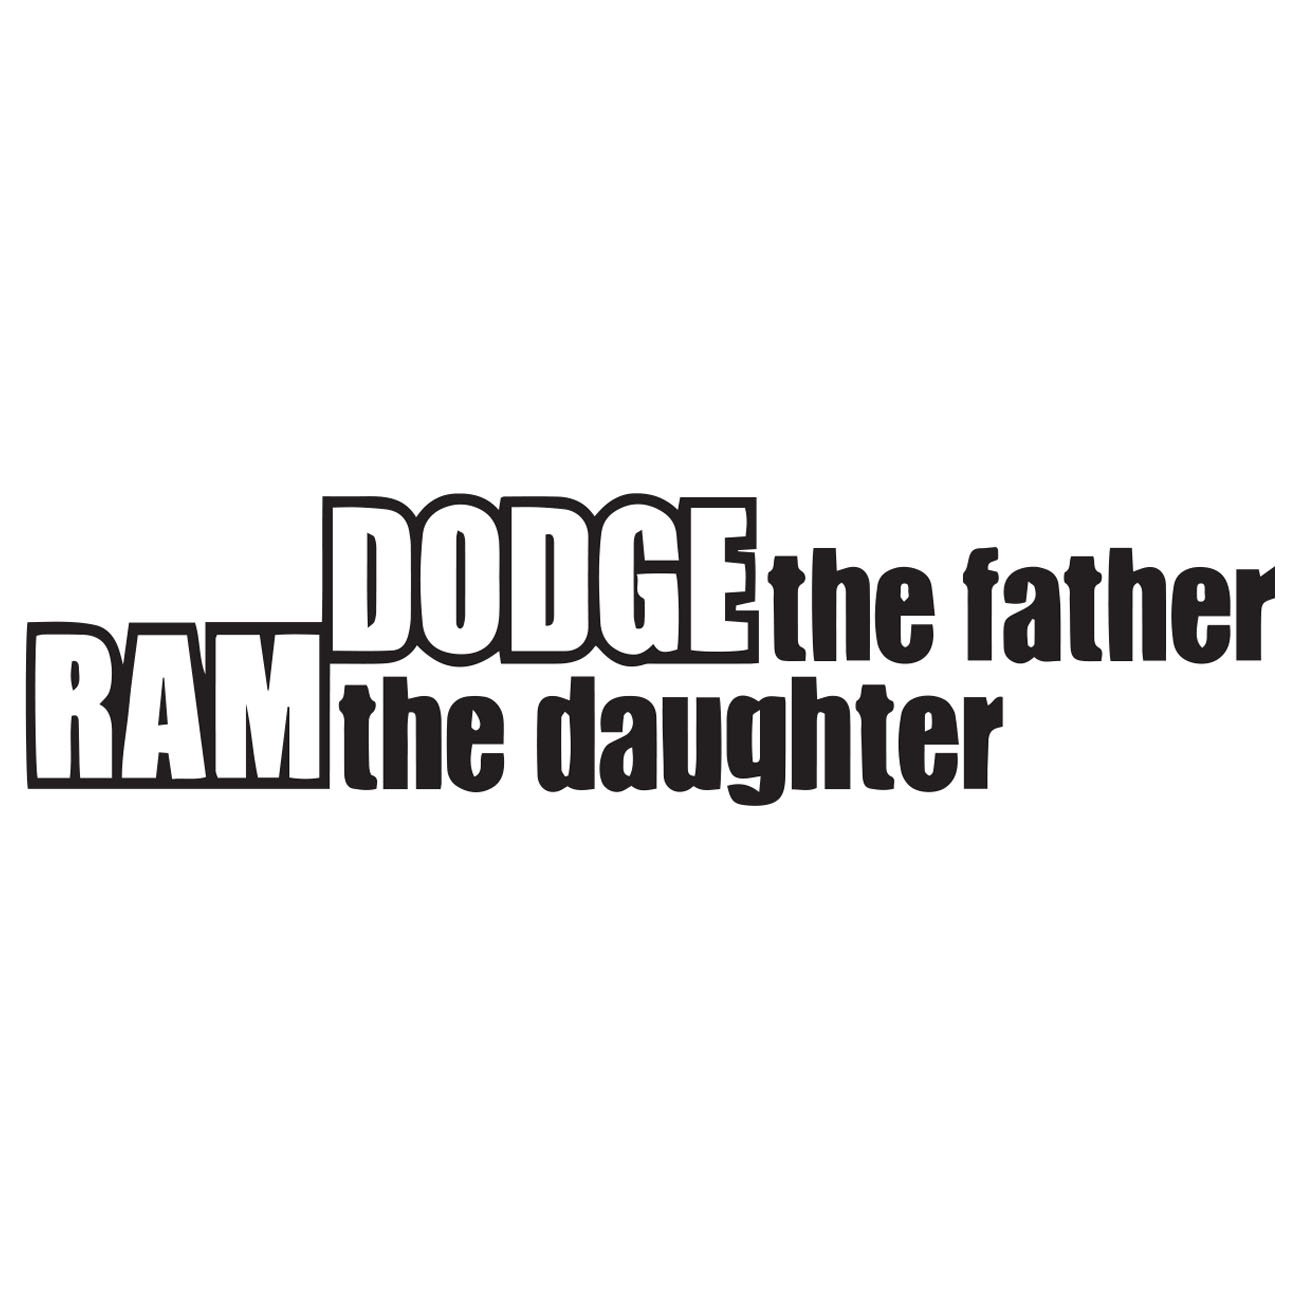 Dodge the farther - Ram the daughter